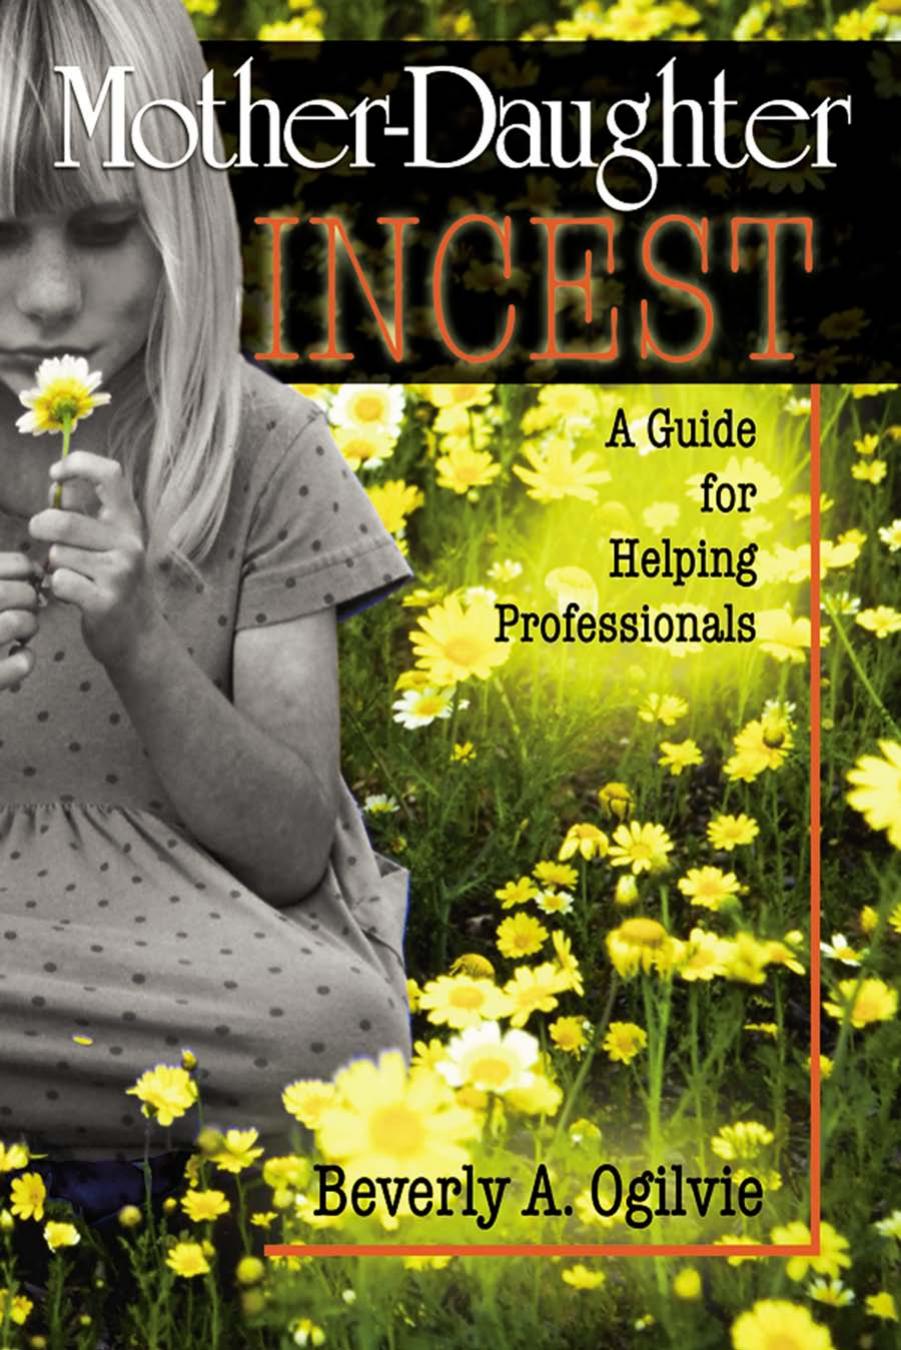 Mother-Daughter Incest : A Guide for Helping Professionals by Beverly Ogilvie